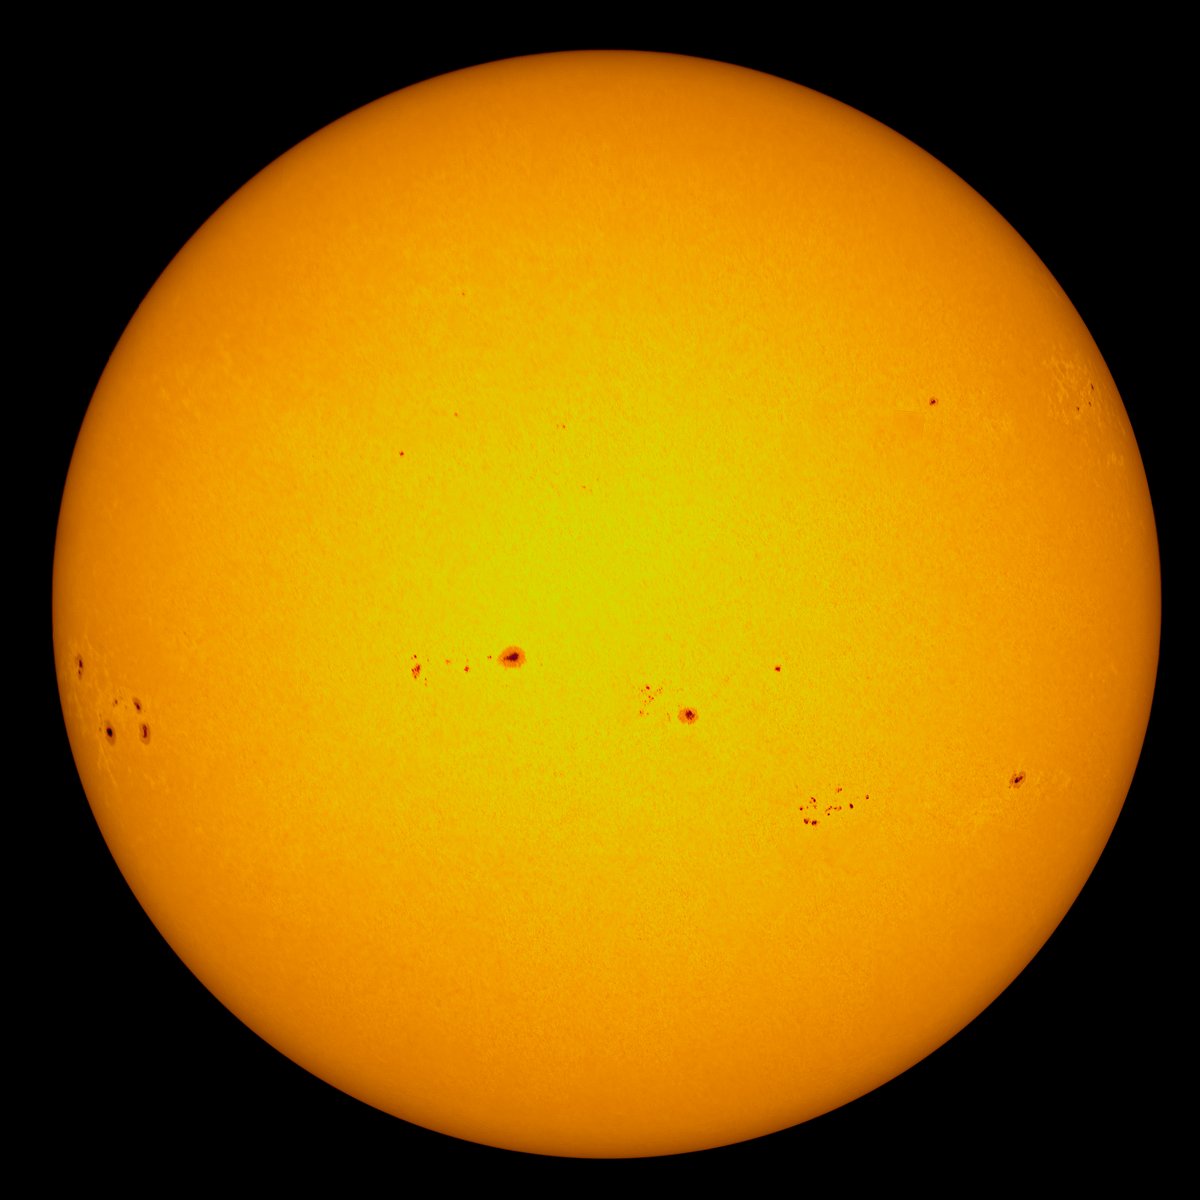 Friday's Sun with more activity appearing. @MoonHourSocial #astronomy #astrophotography @ThePhotoHour